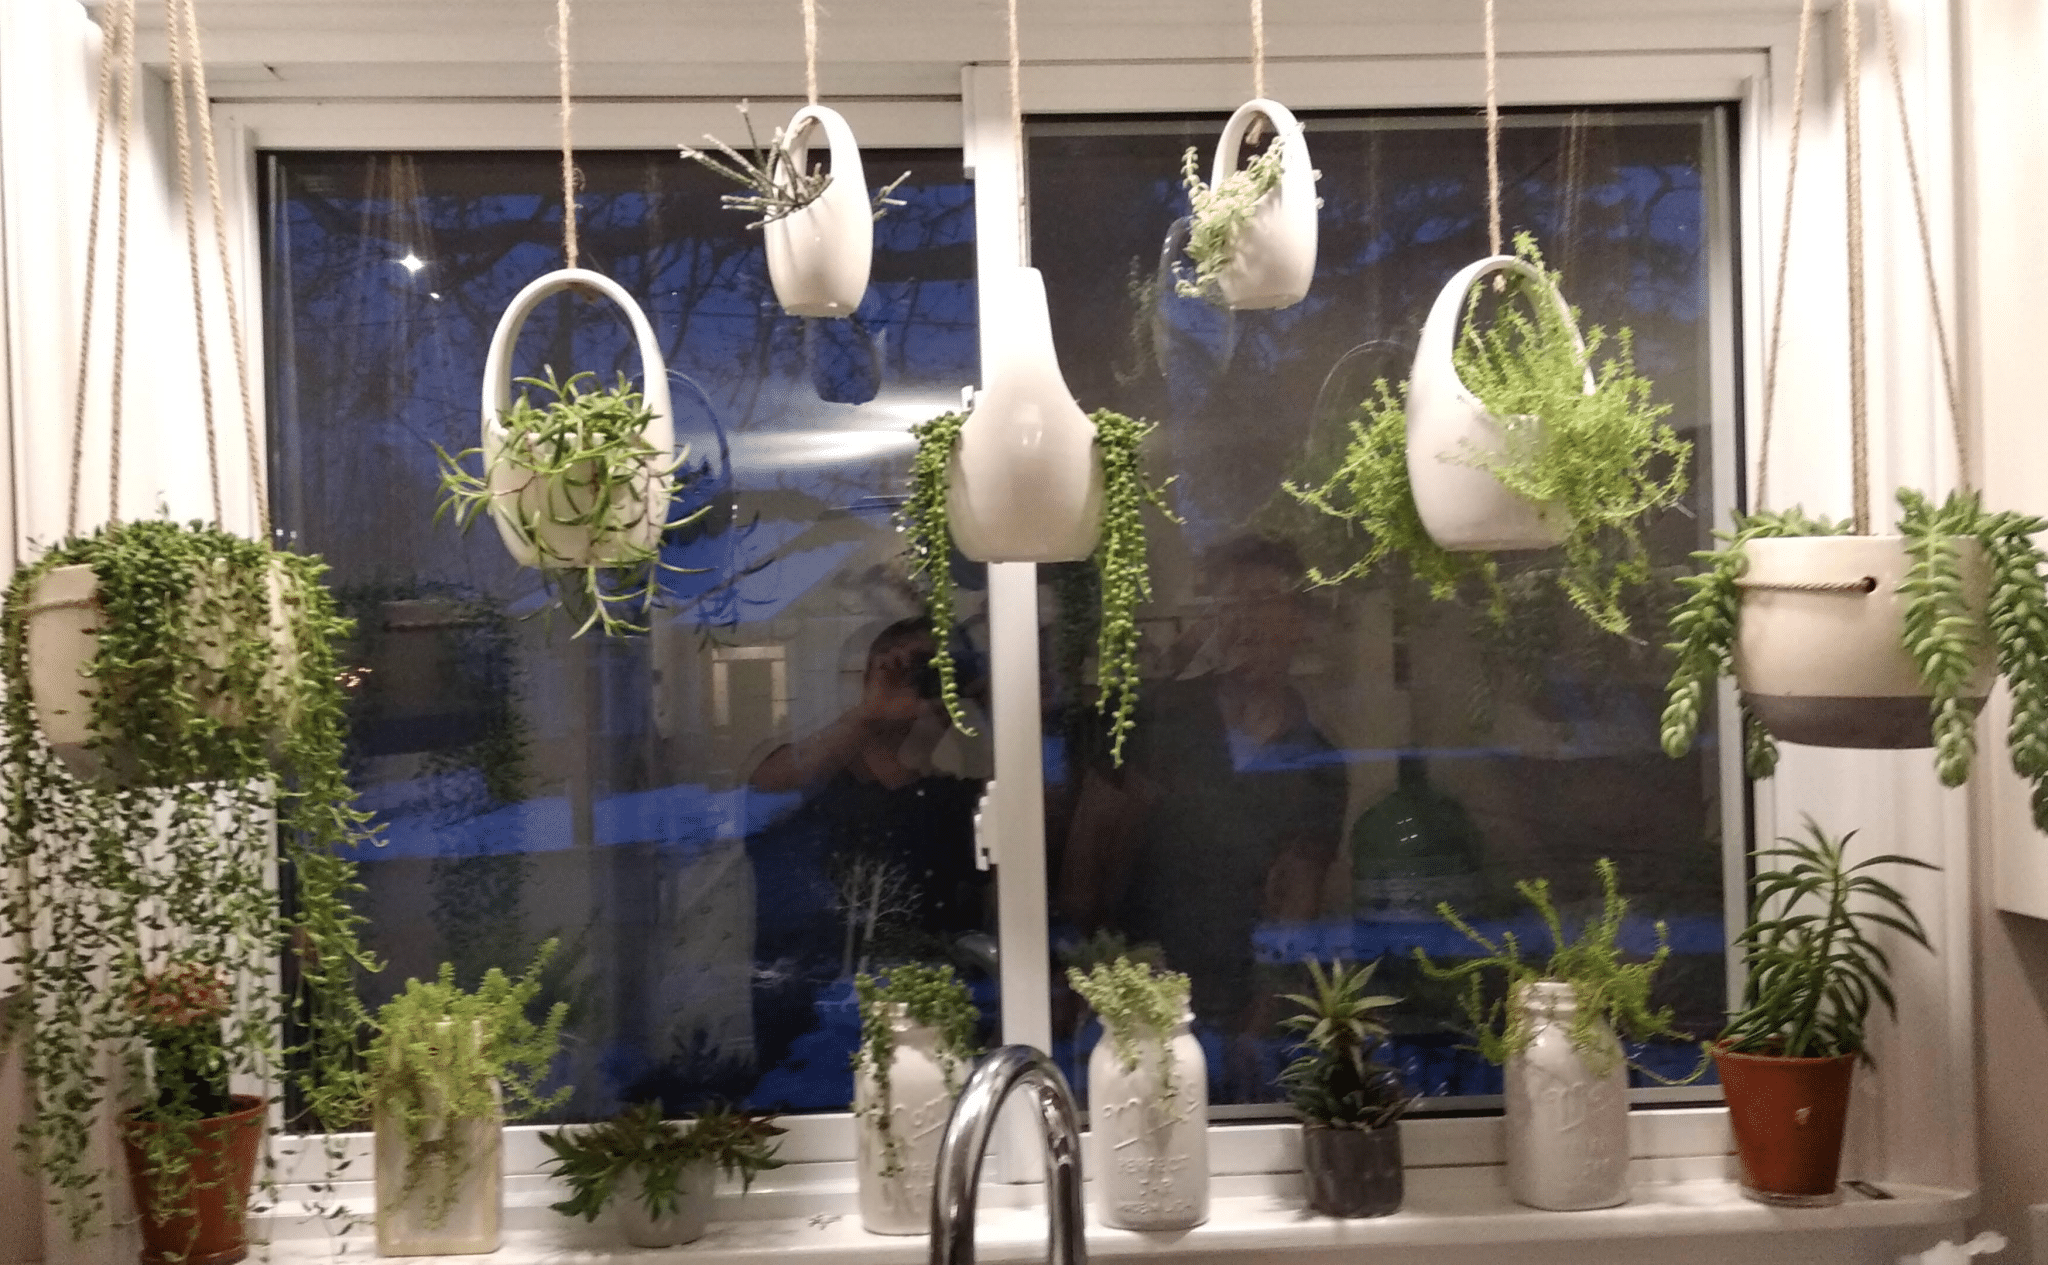 Succulent plants with bright indirect light and creative display